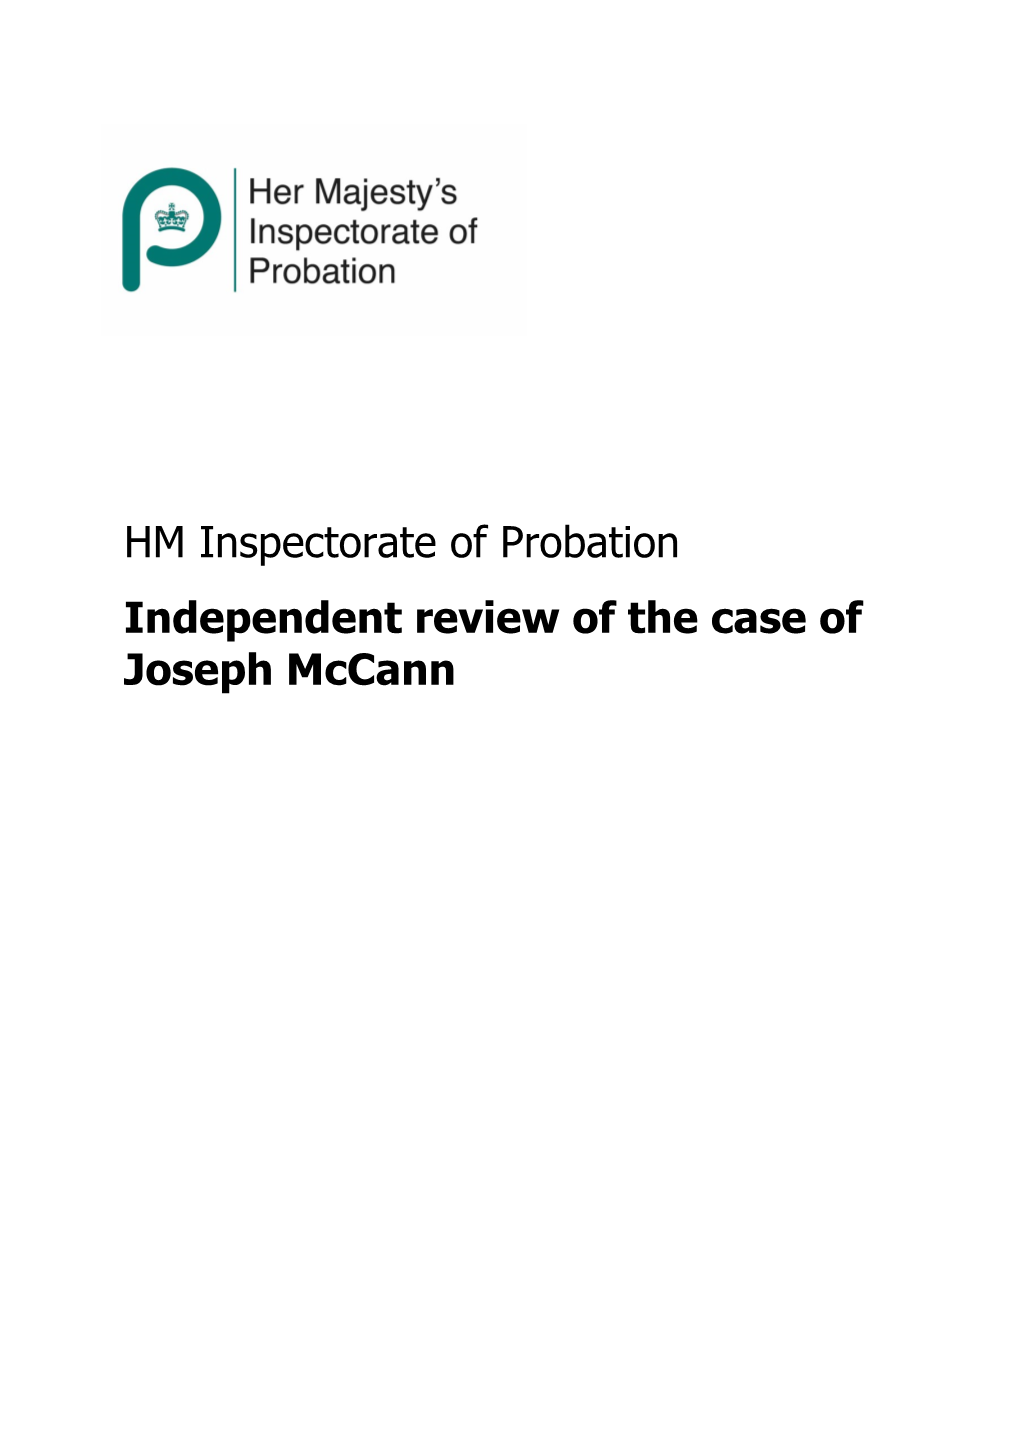 Independent Review of the Case of Joseph Mccann